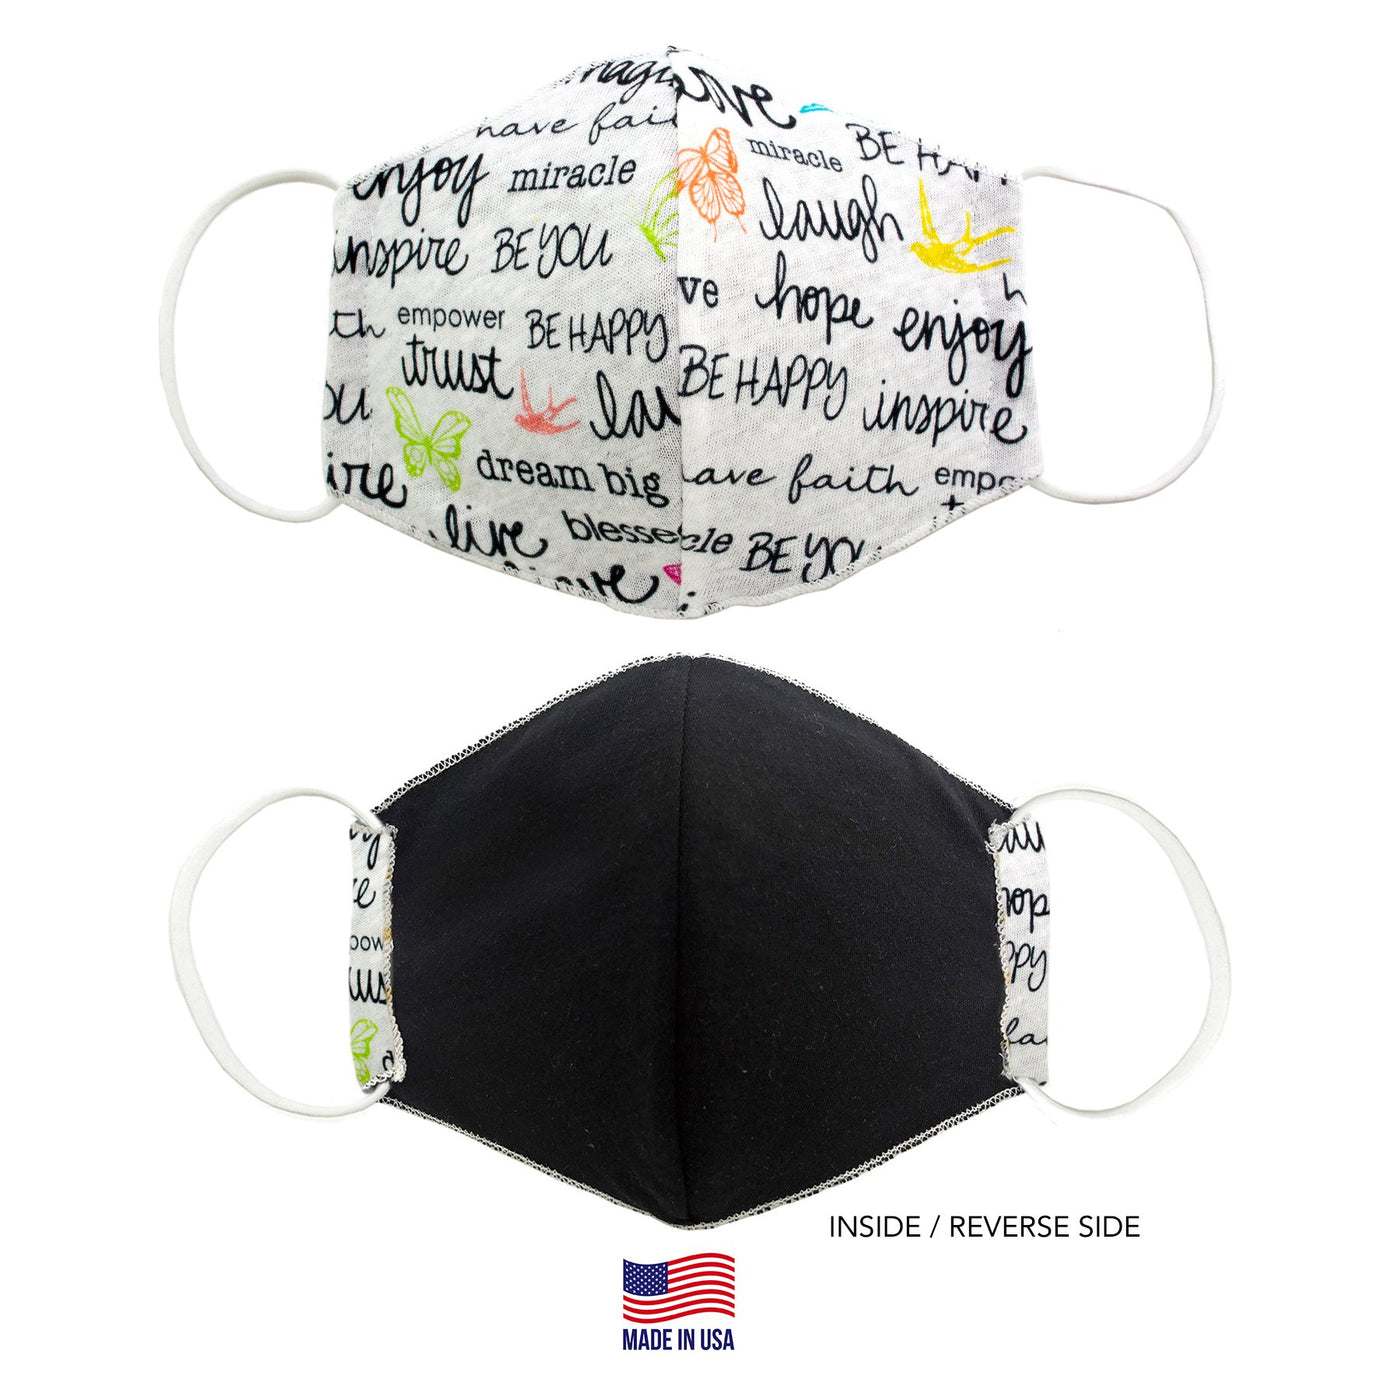 100% COTTON MADE IN THE USA VERSES WHITE 3D FABRIC FACE MASK